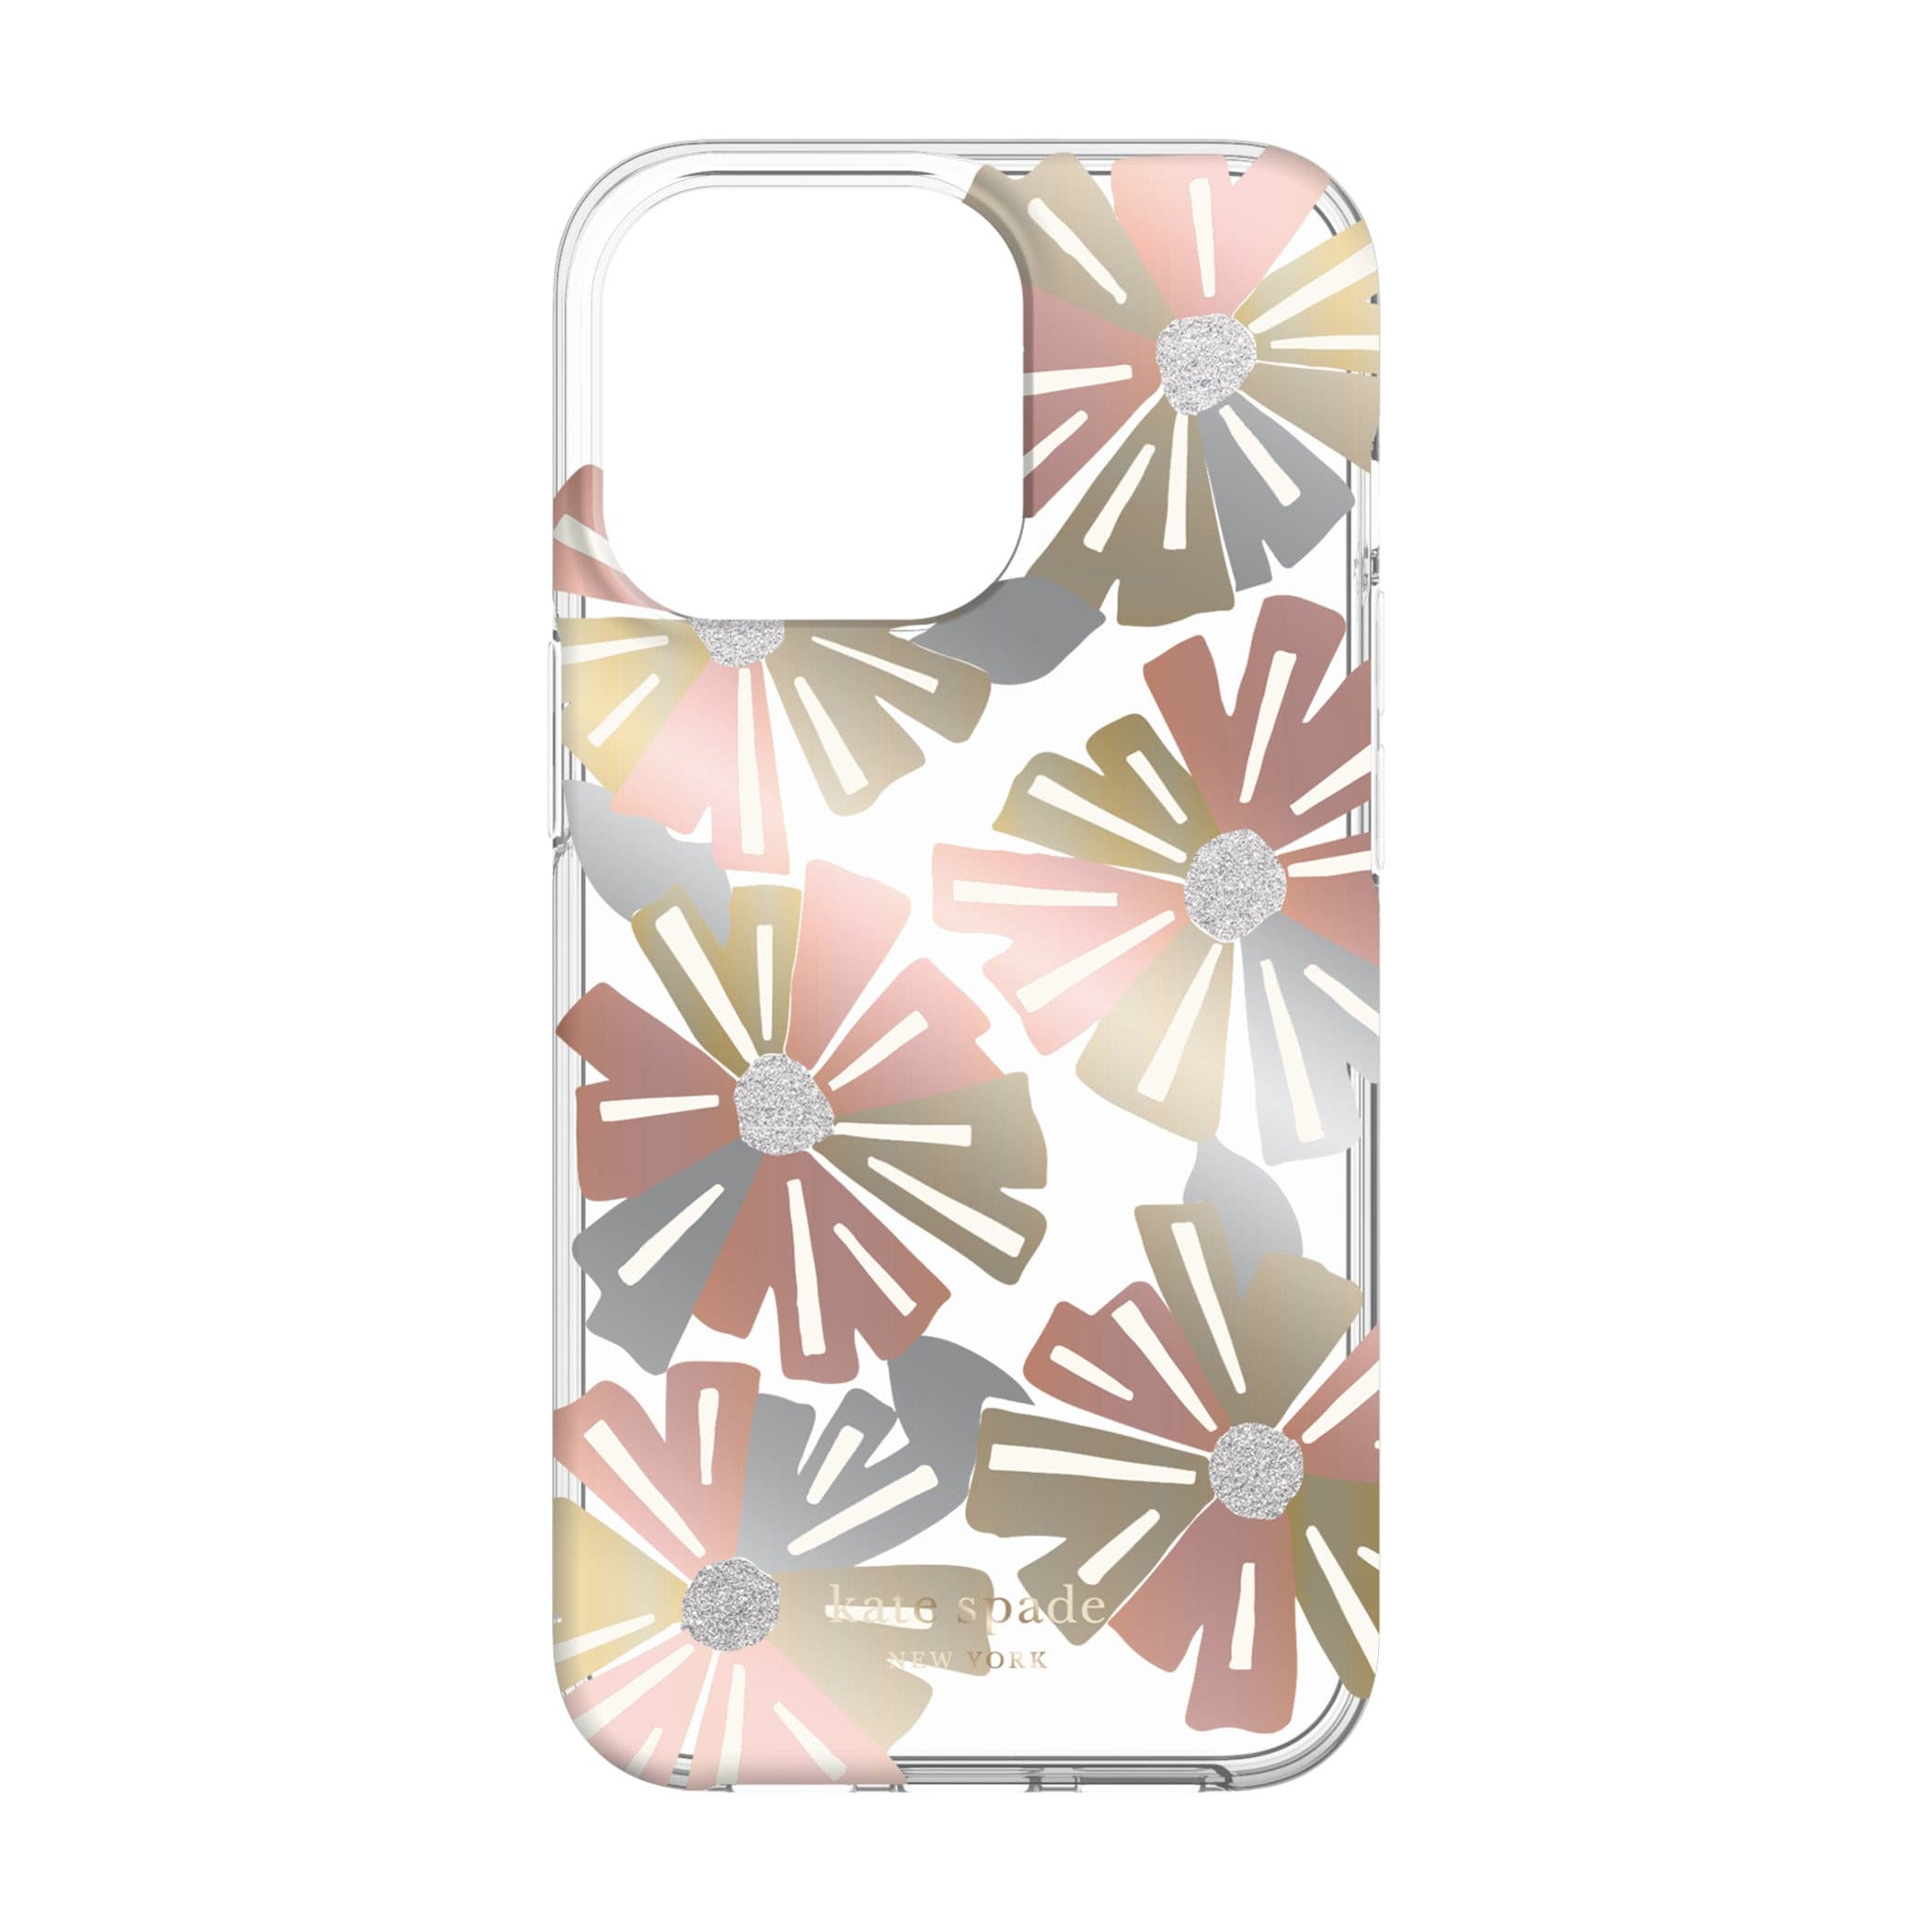 Kate Spade New York Protective Hardshell Case for iPhone 13 Pro.